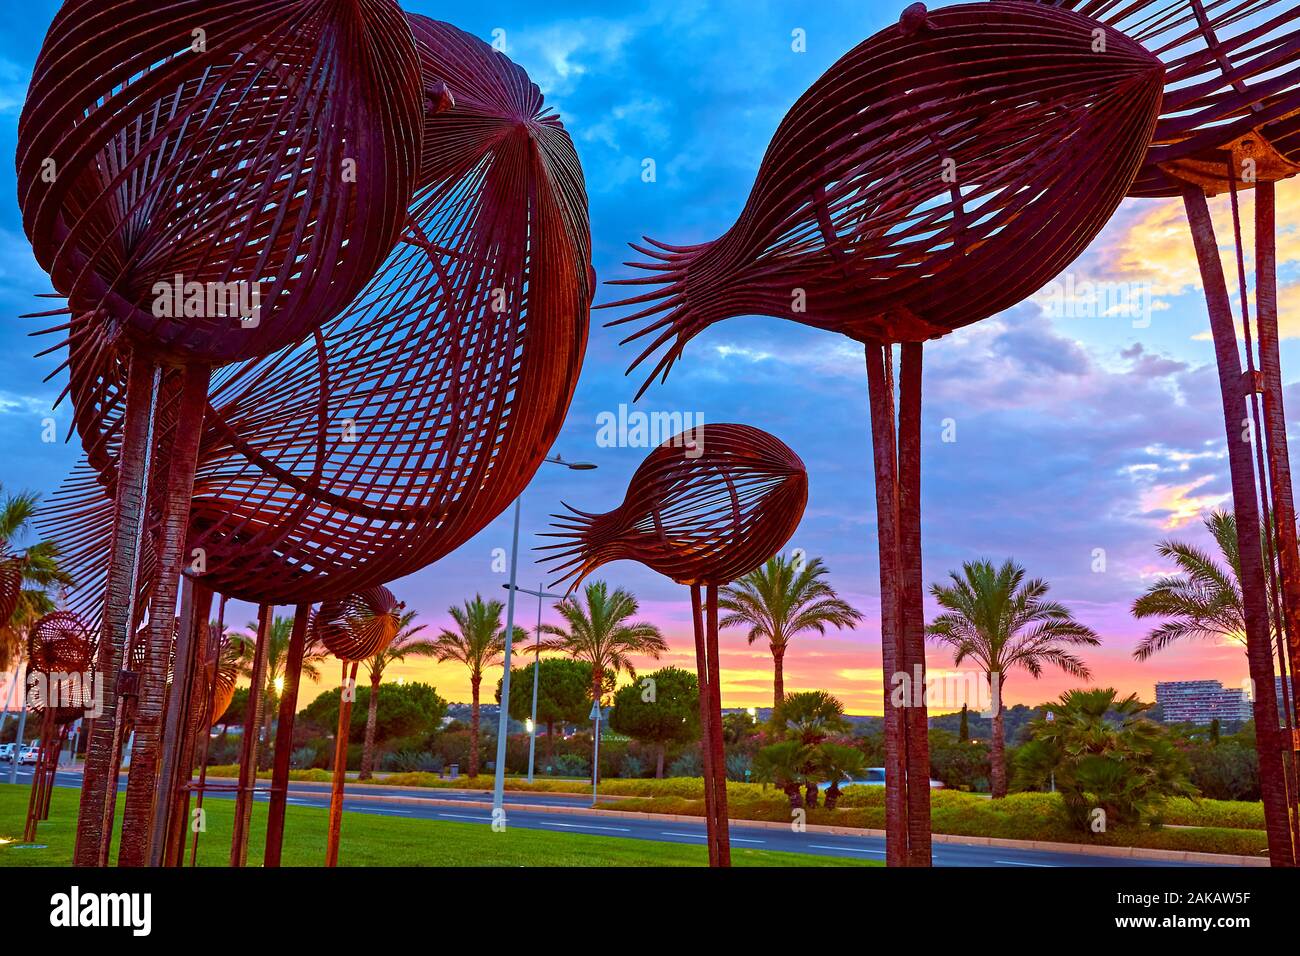 Iron fish sculptures at Gallets beach, near hippodrome in Cagnes sur mer, France Stock Photo